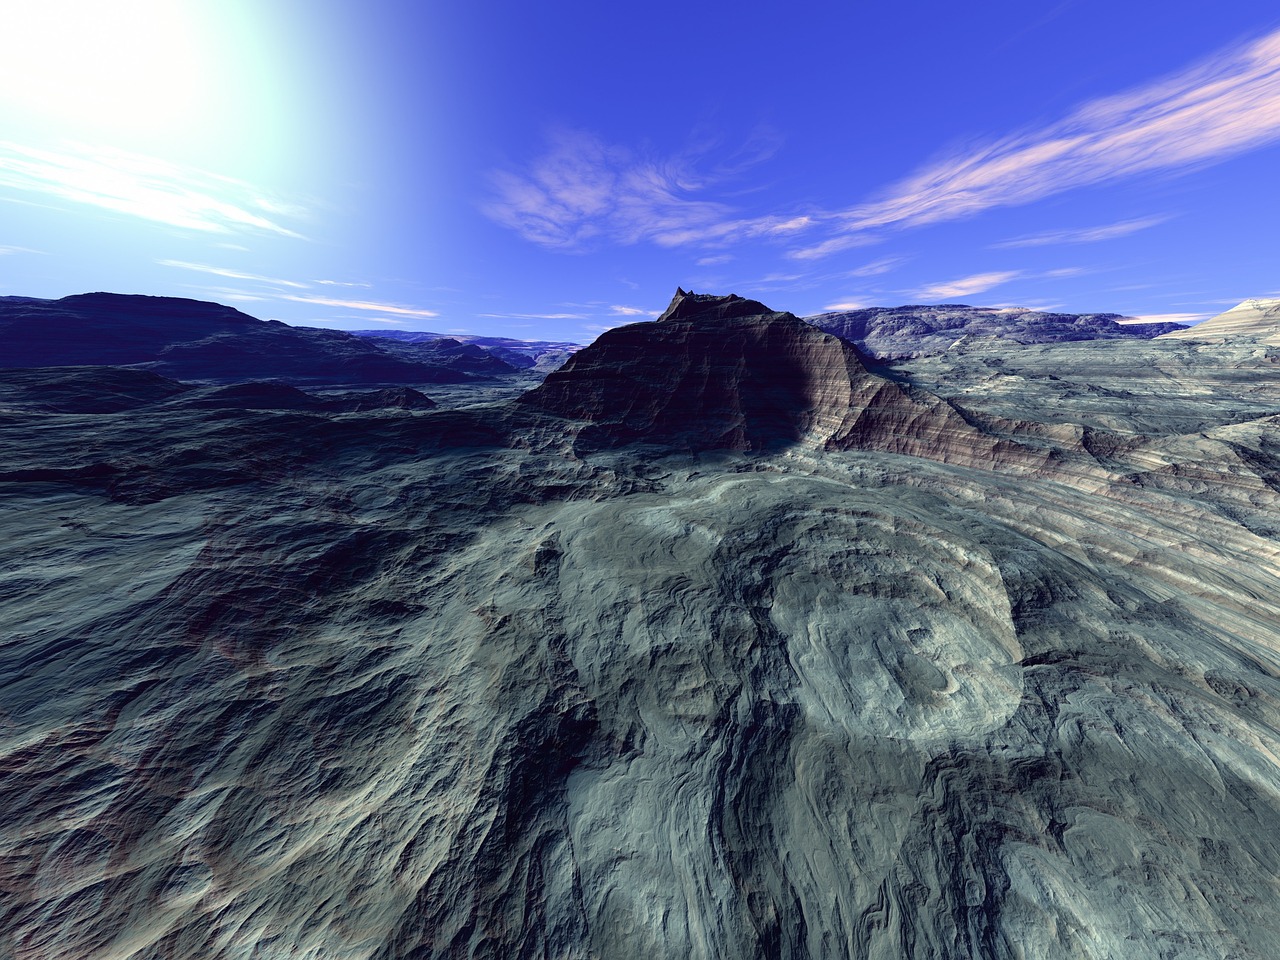 a computer generated image of a mountain in the middle of the ocean, a digital rendering, digital art, in the dry rock desert, mesa plateau, landscape photo, wide high angle view